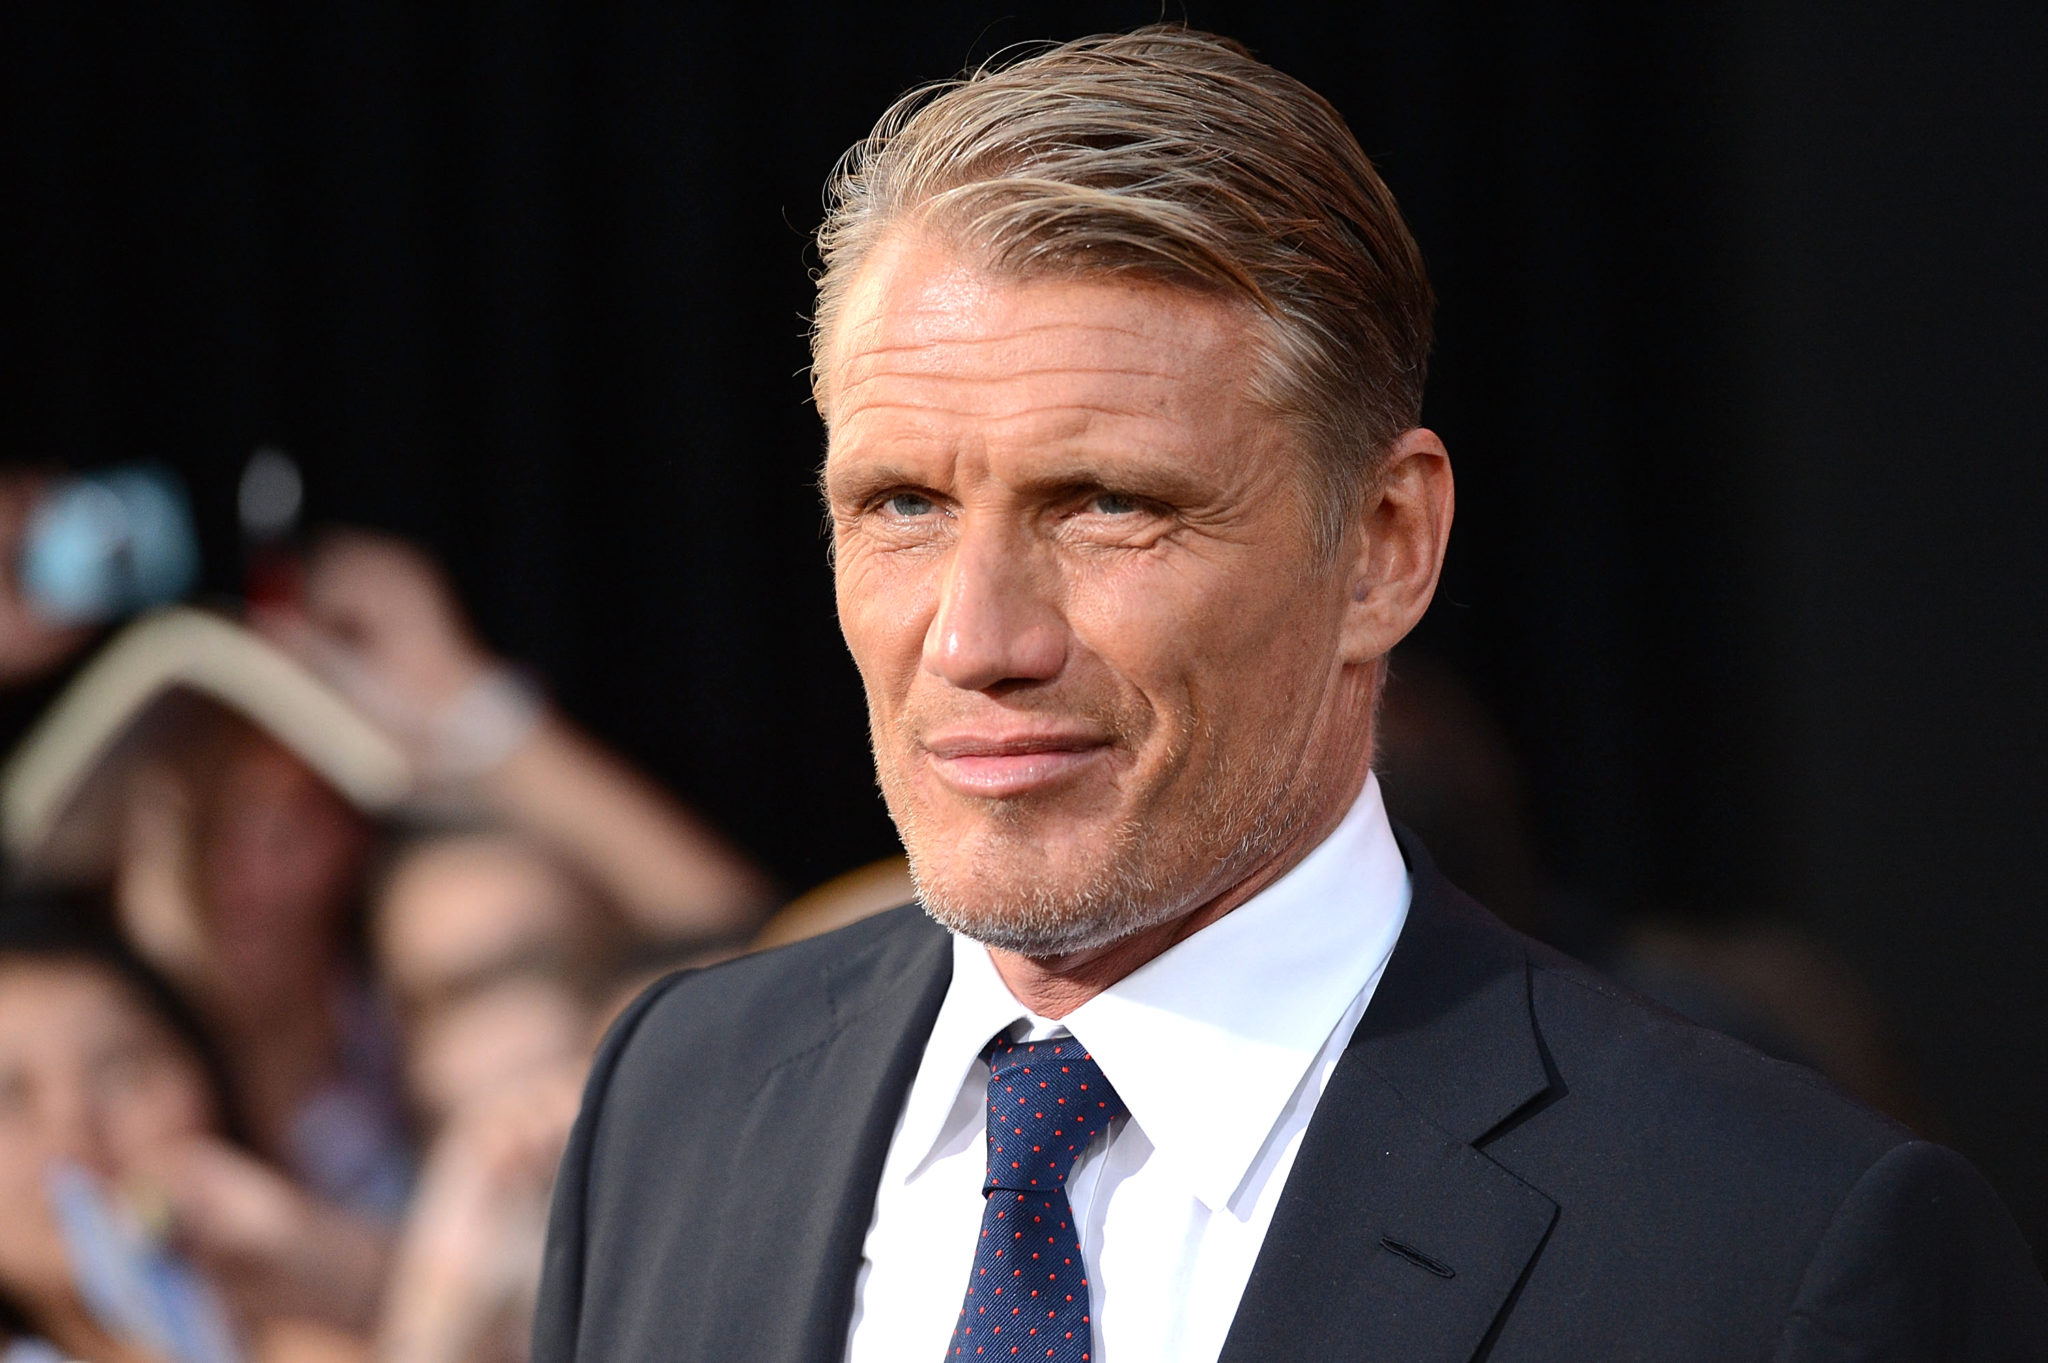 dolph lundgren iq rocky height networth movie chemical engineering royal institute of technology